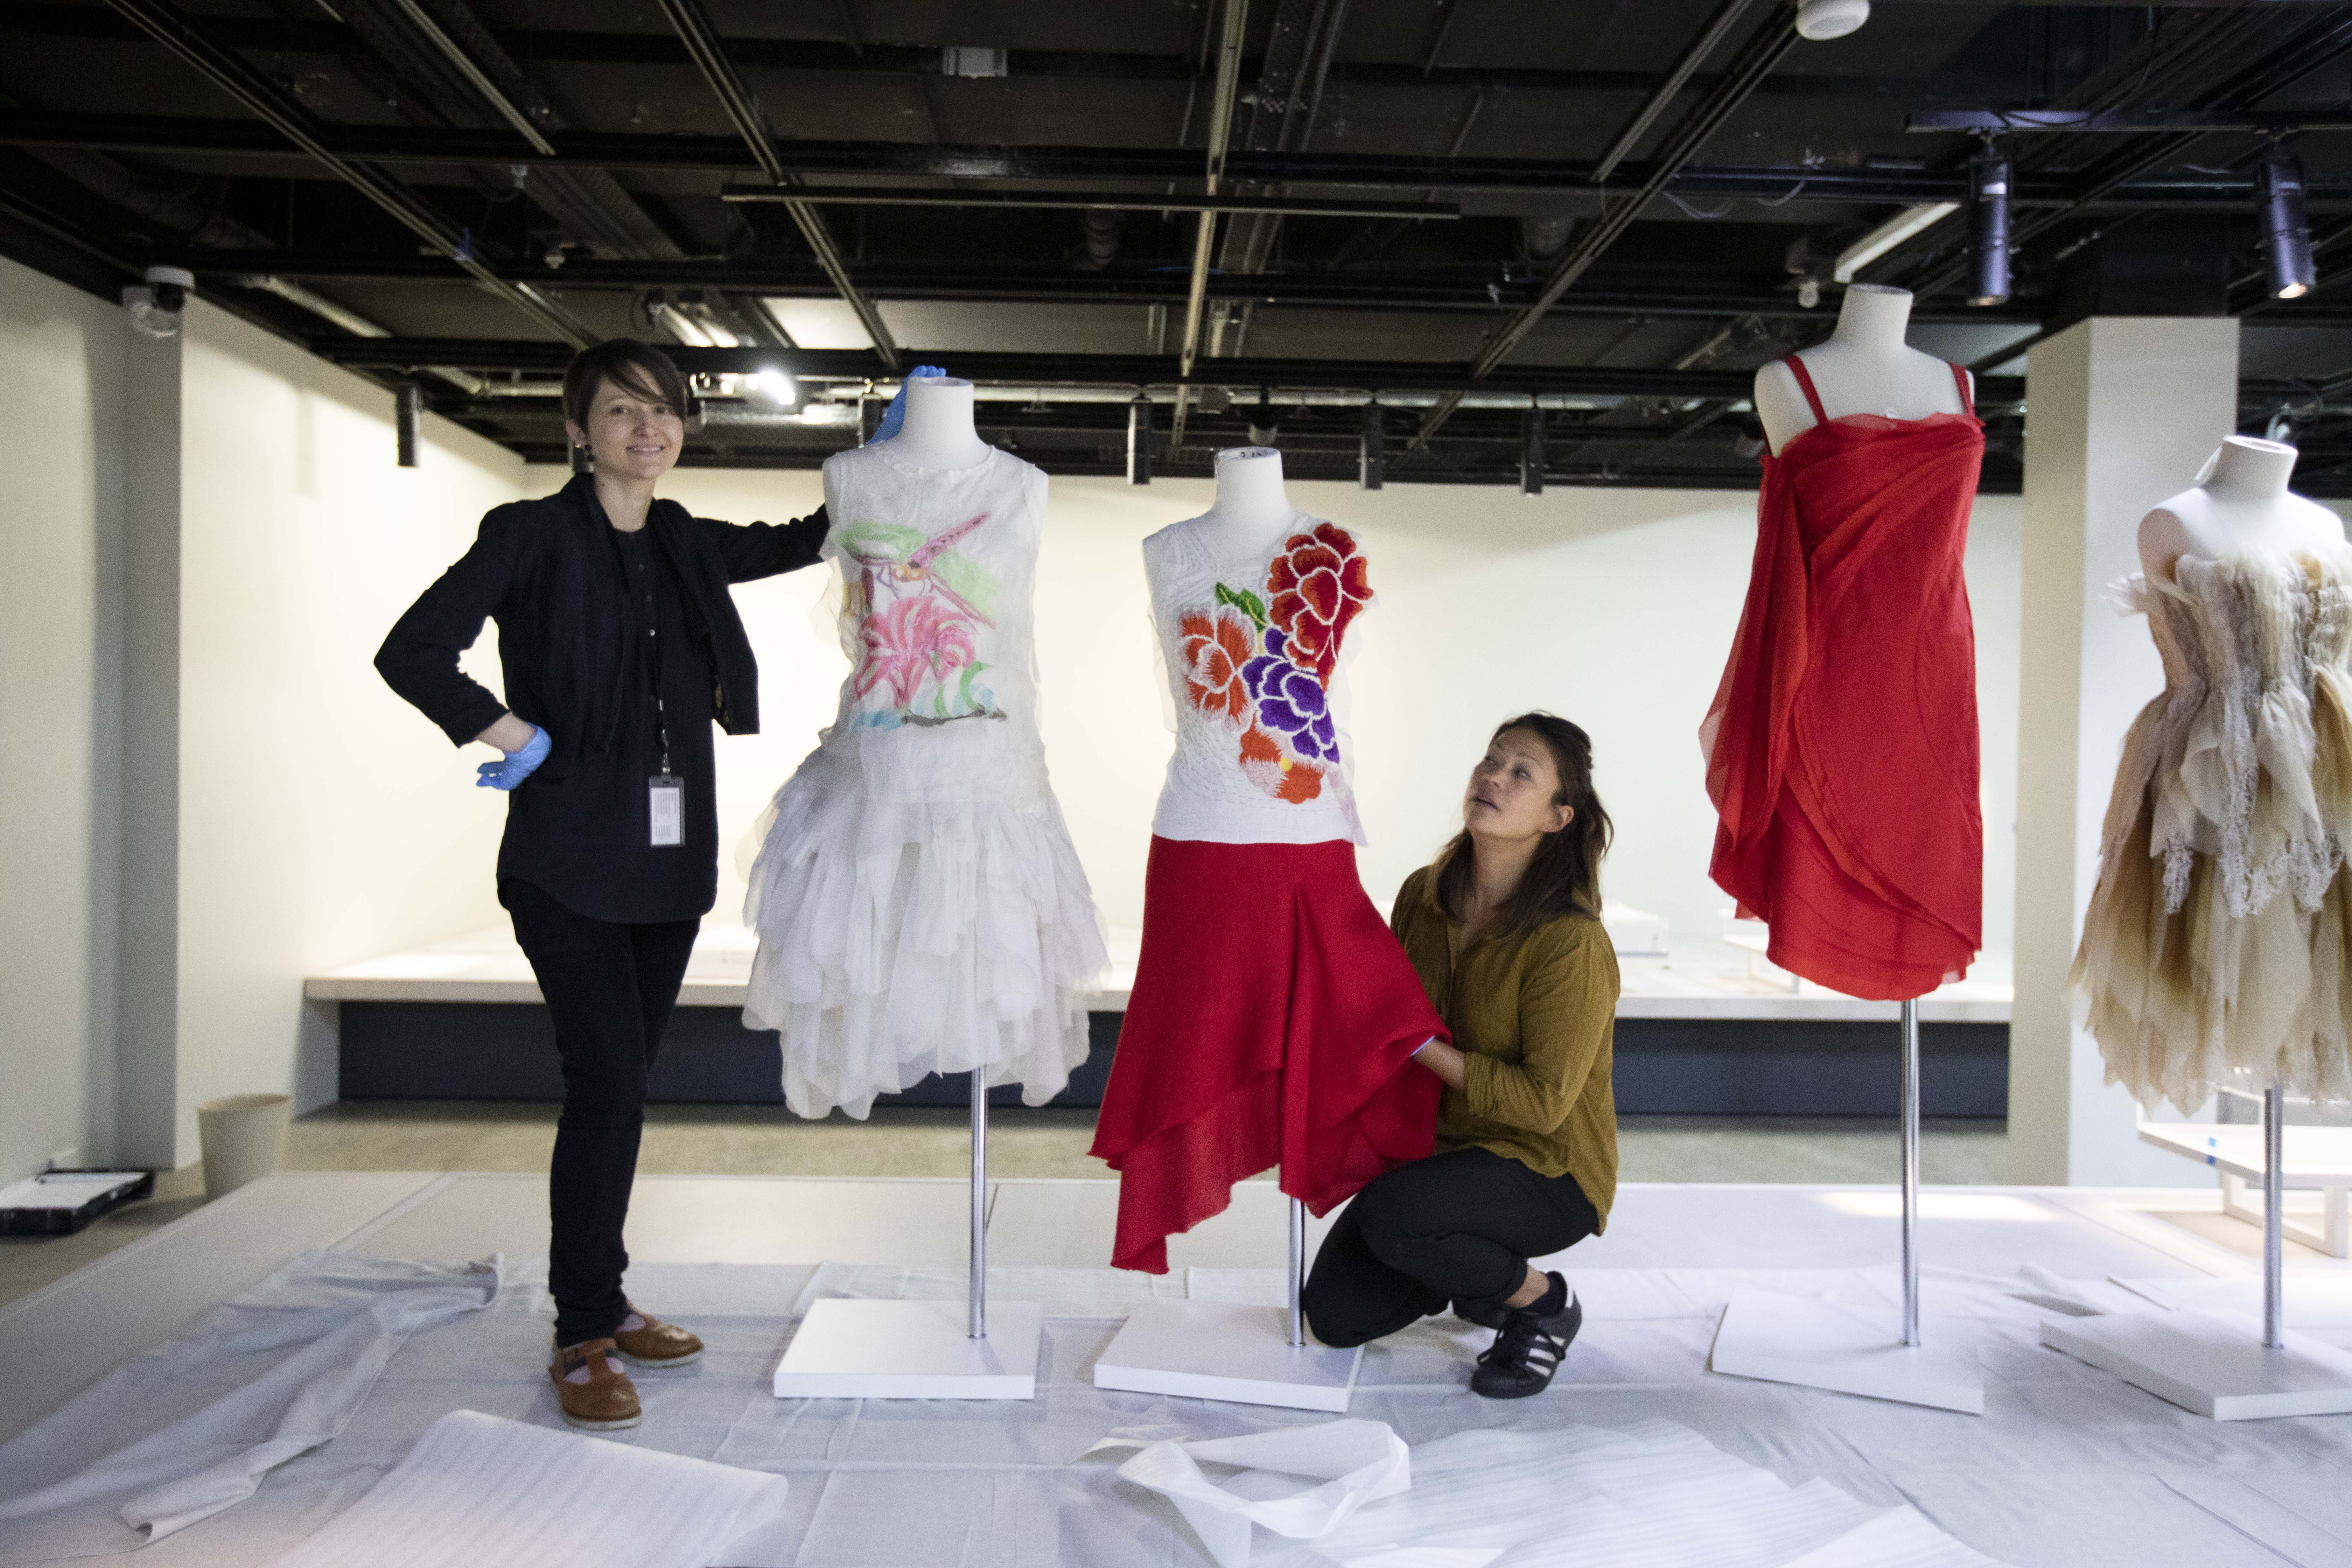 Two women in the process of placing the clothed dress forms into position on the display plinths.